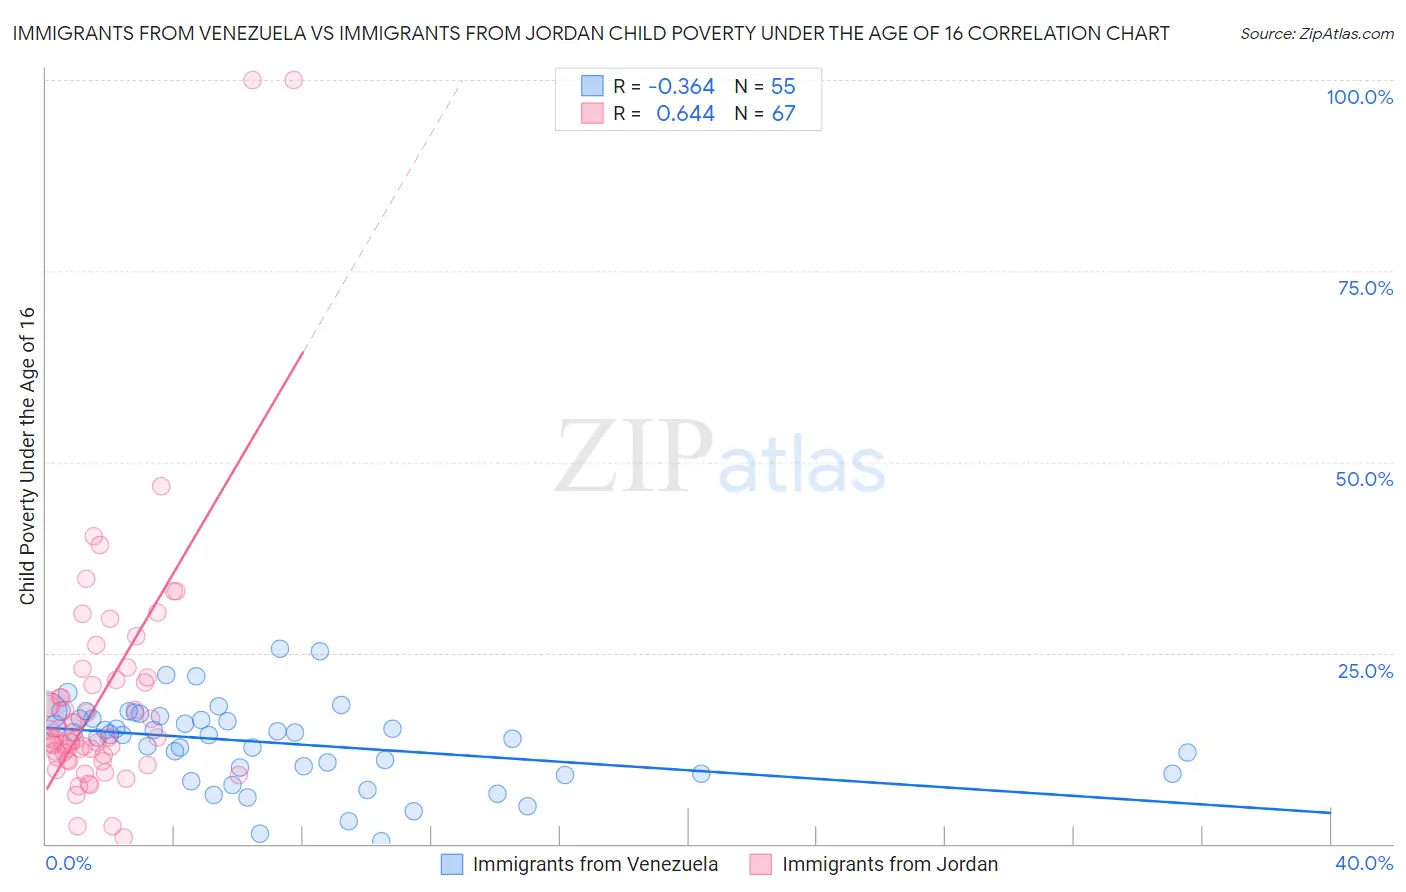 Immigrants from Venezuela vs Immigrants from Jordan Child Poverty Under the Age of 16